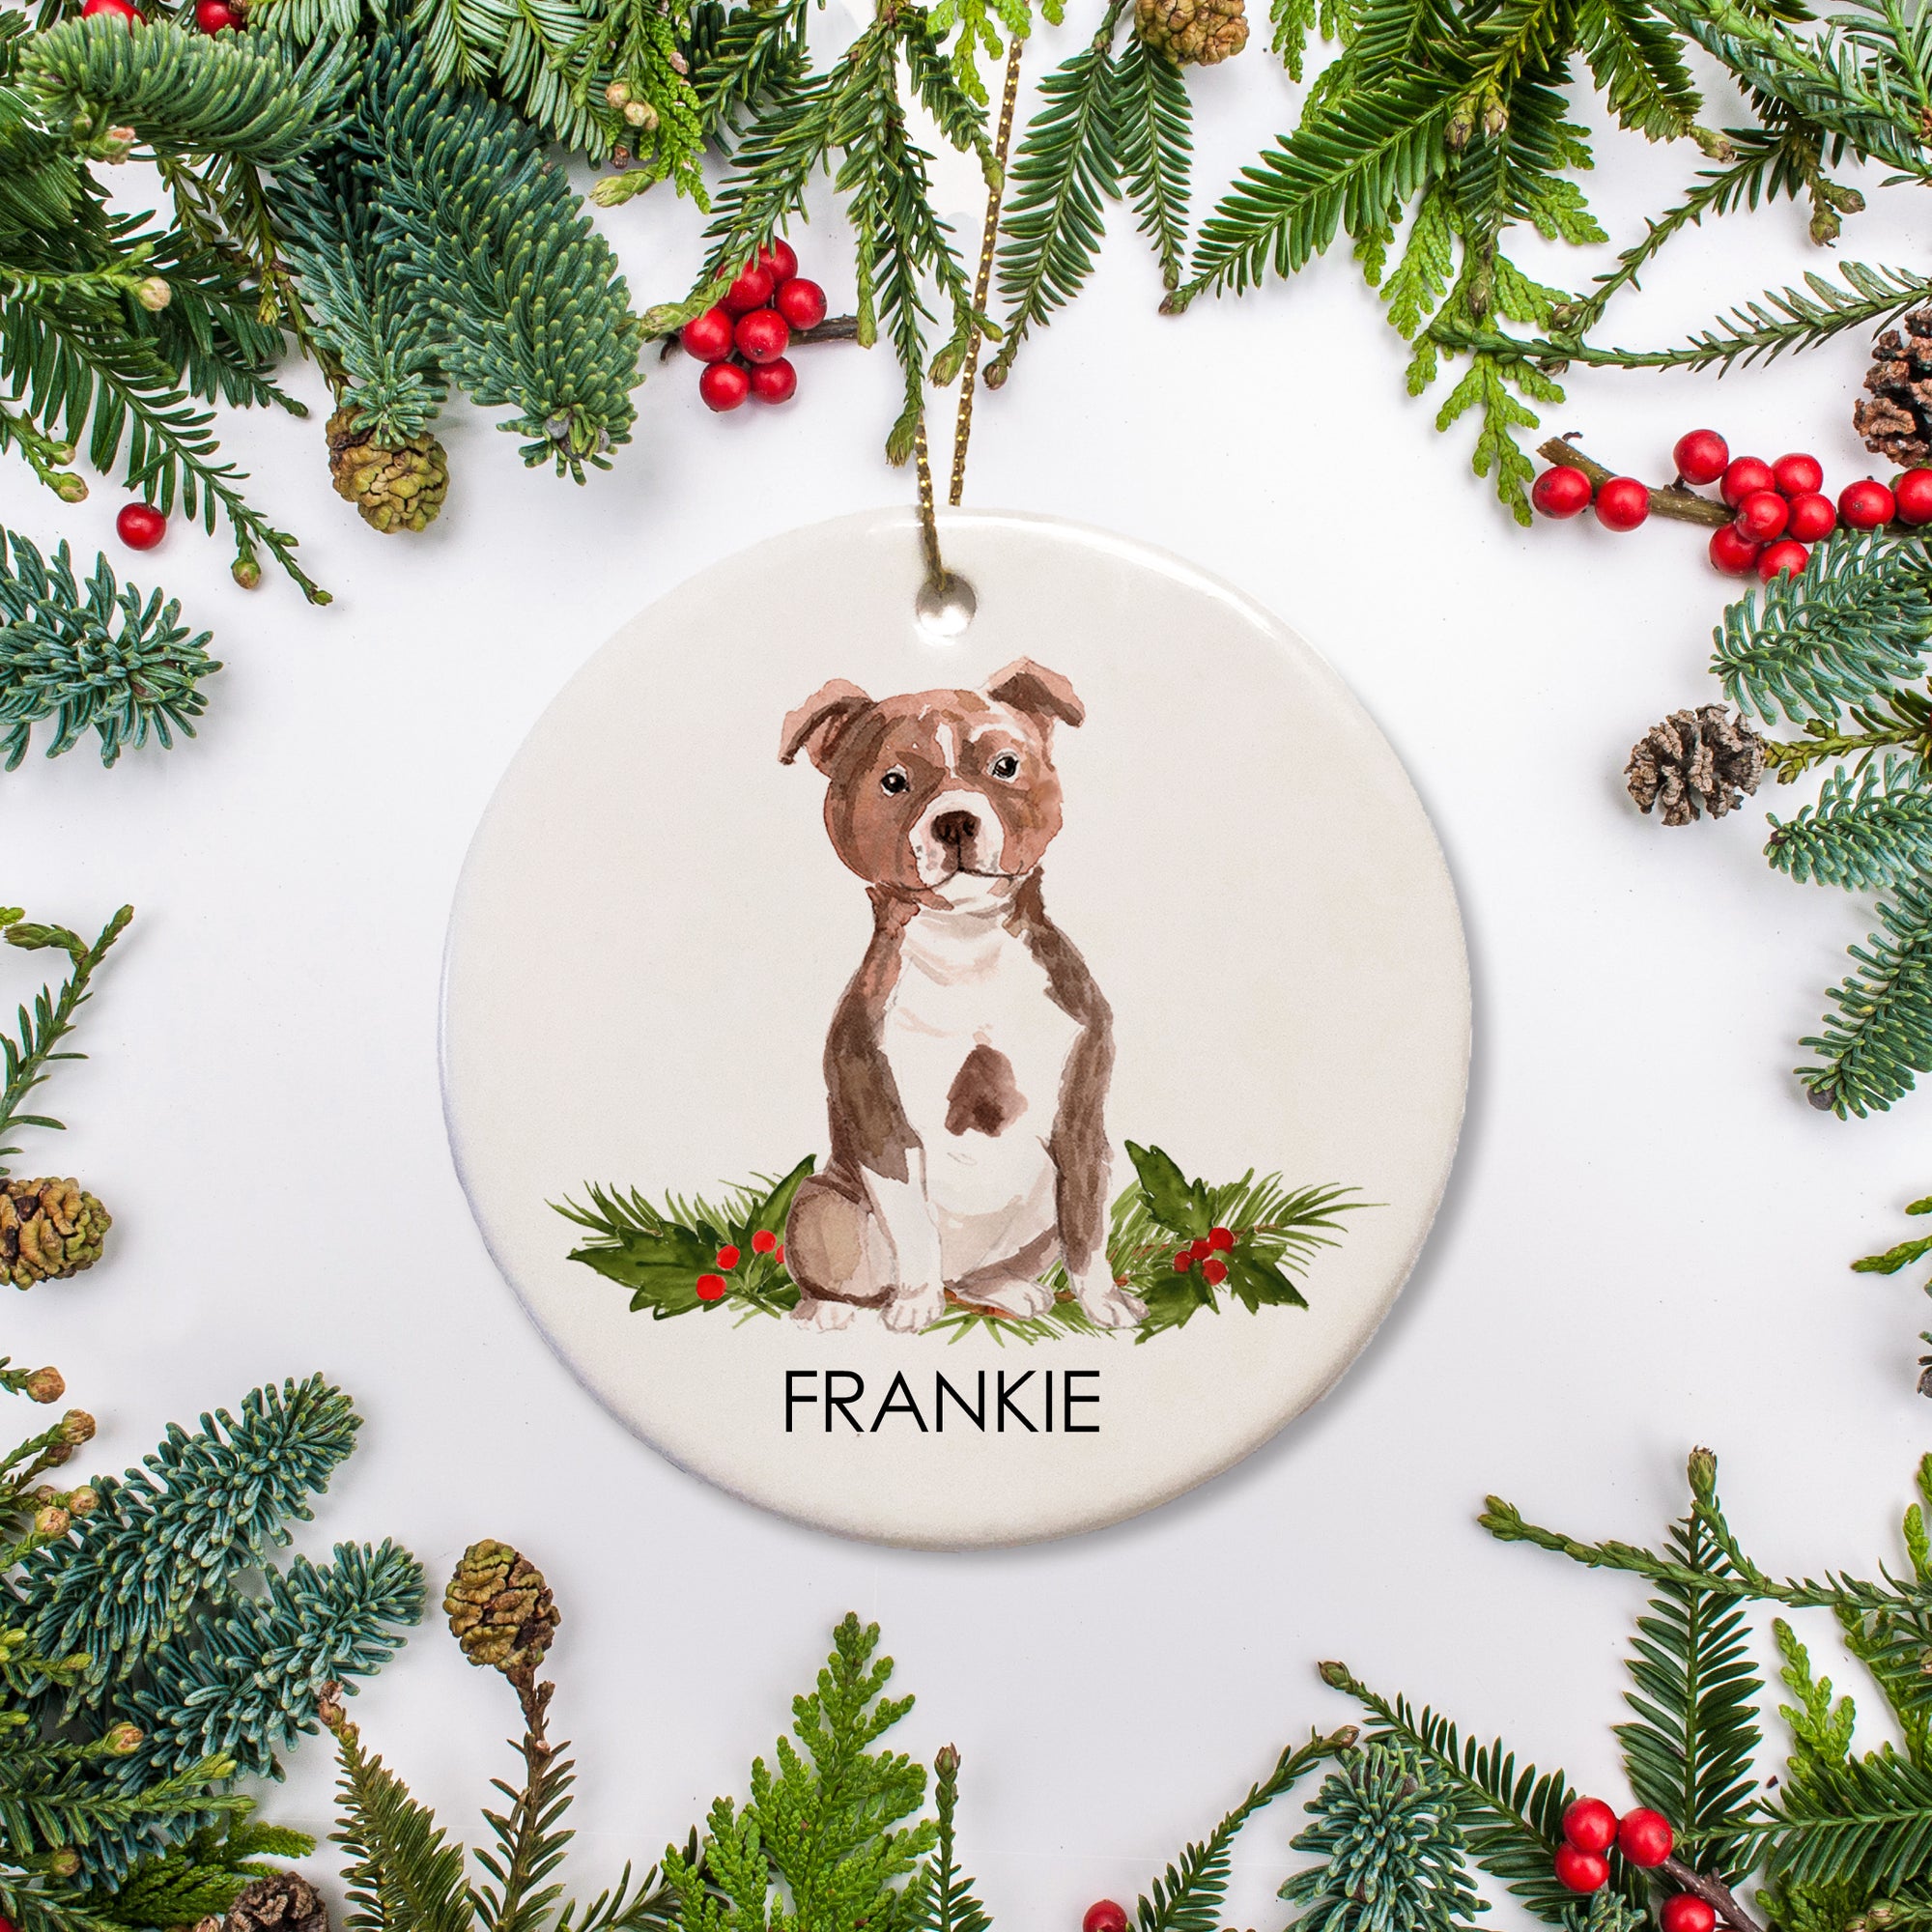 This Christmas, add a special touch to your tree with a personalized Staffordshire Bull Terrier ornament. Crafted from ceramic and customized with your dog's name, this ornament is perfect for celebrating your furry family member this holiday season.